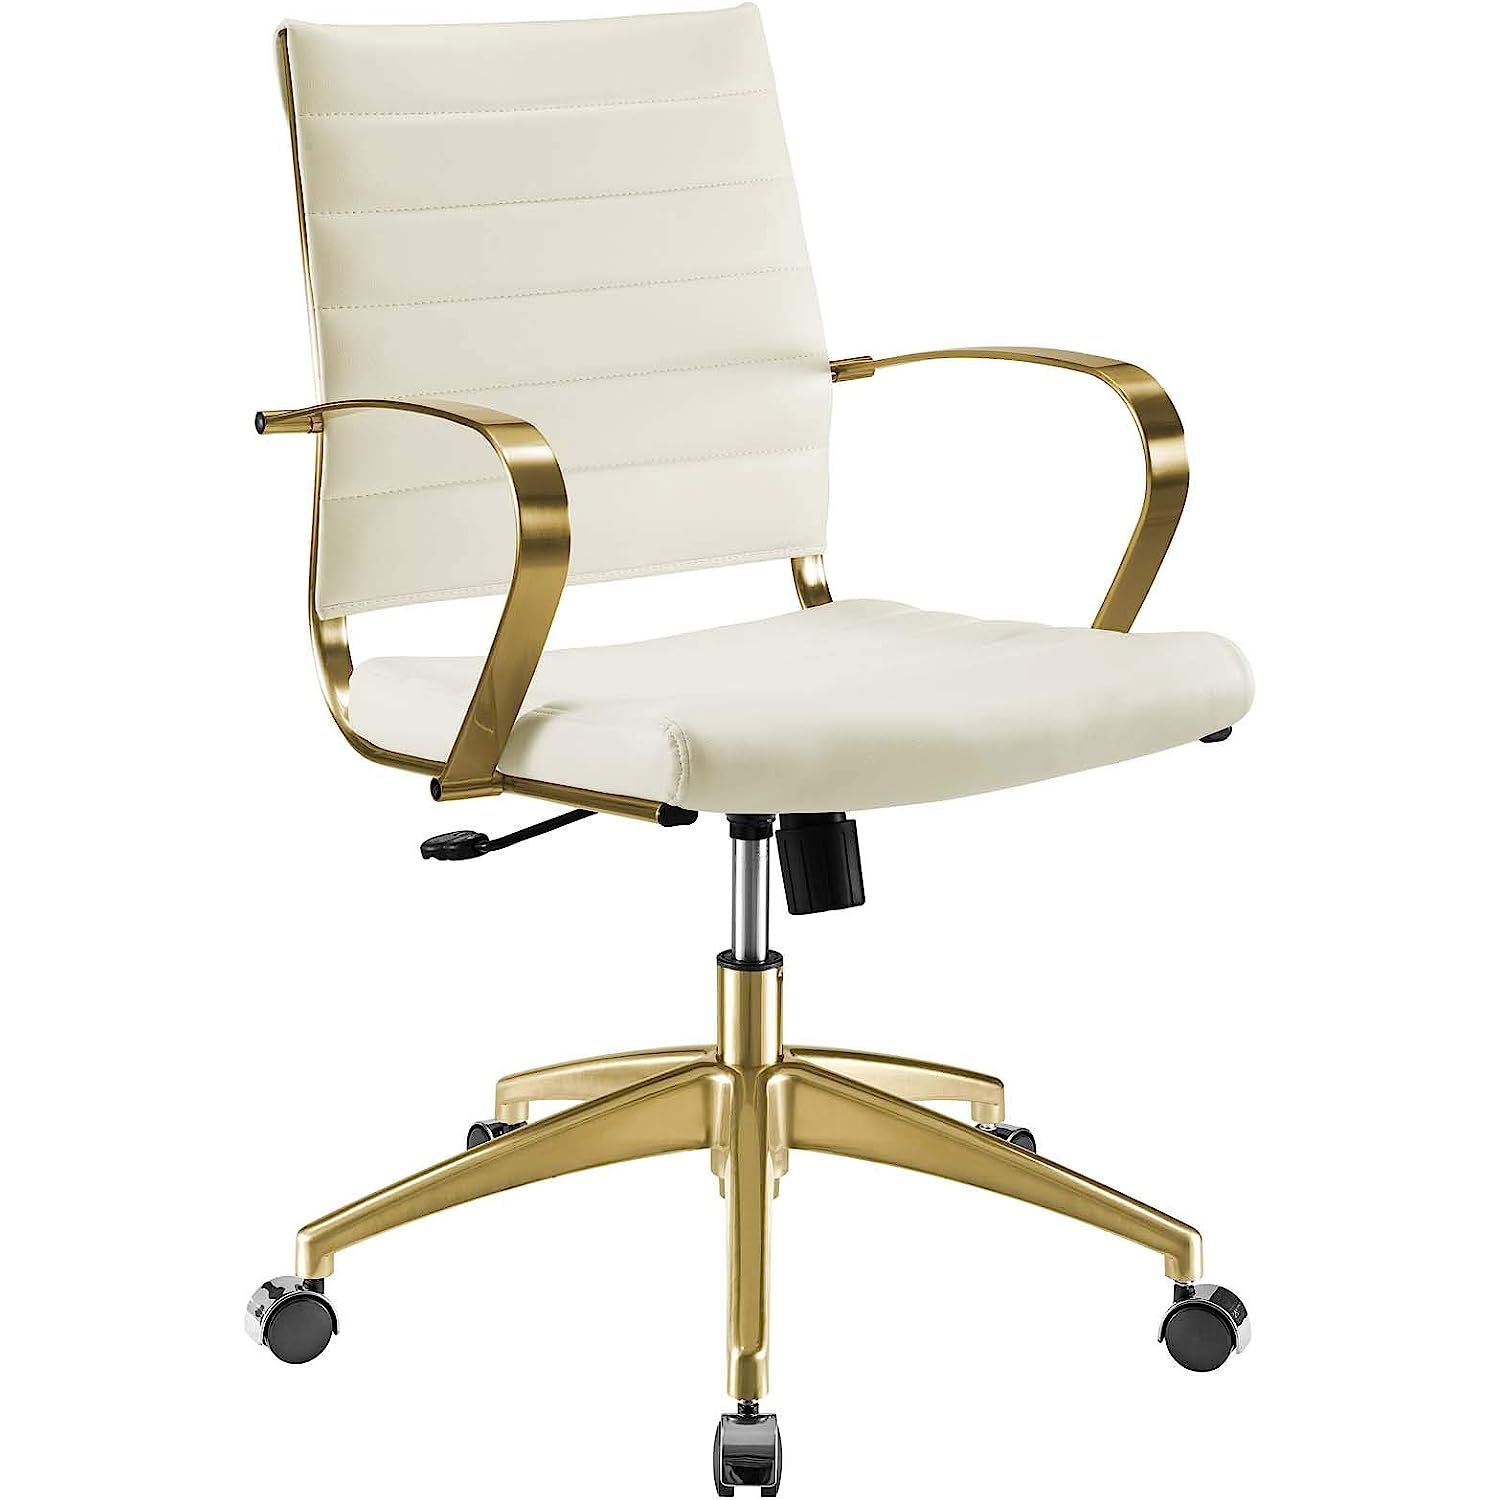 Modway Jive Gold Stainless Steel Executive Managerial Swivel Midback Office Chair | Amazon (US)